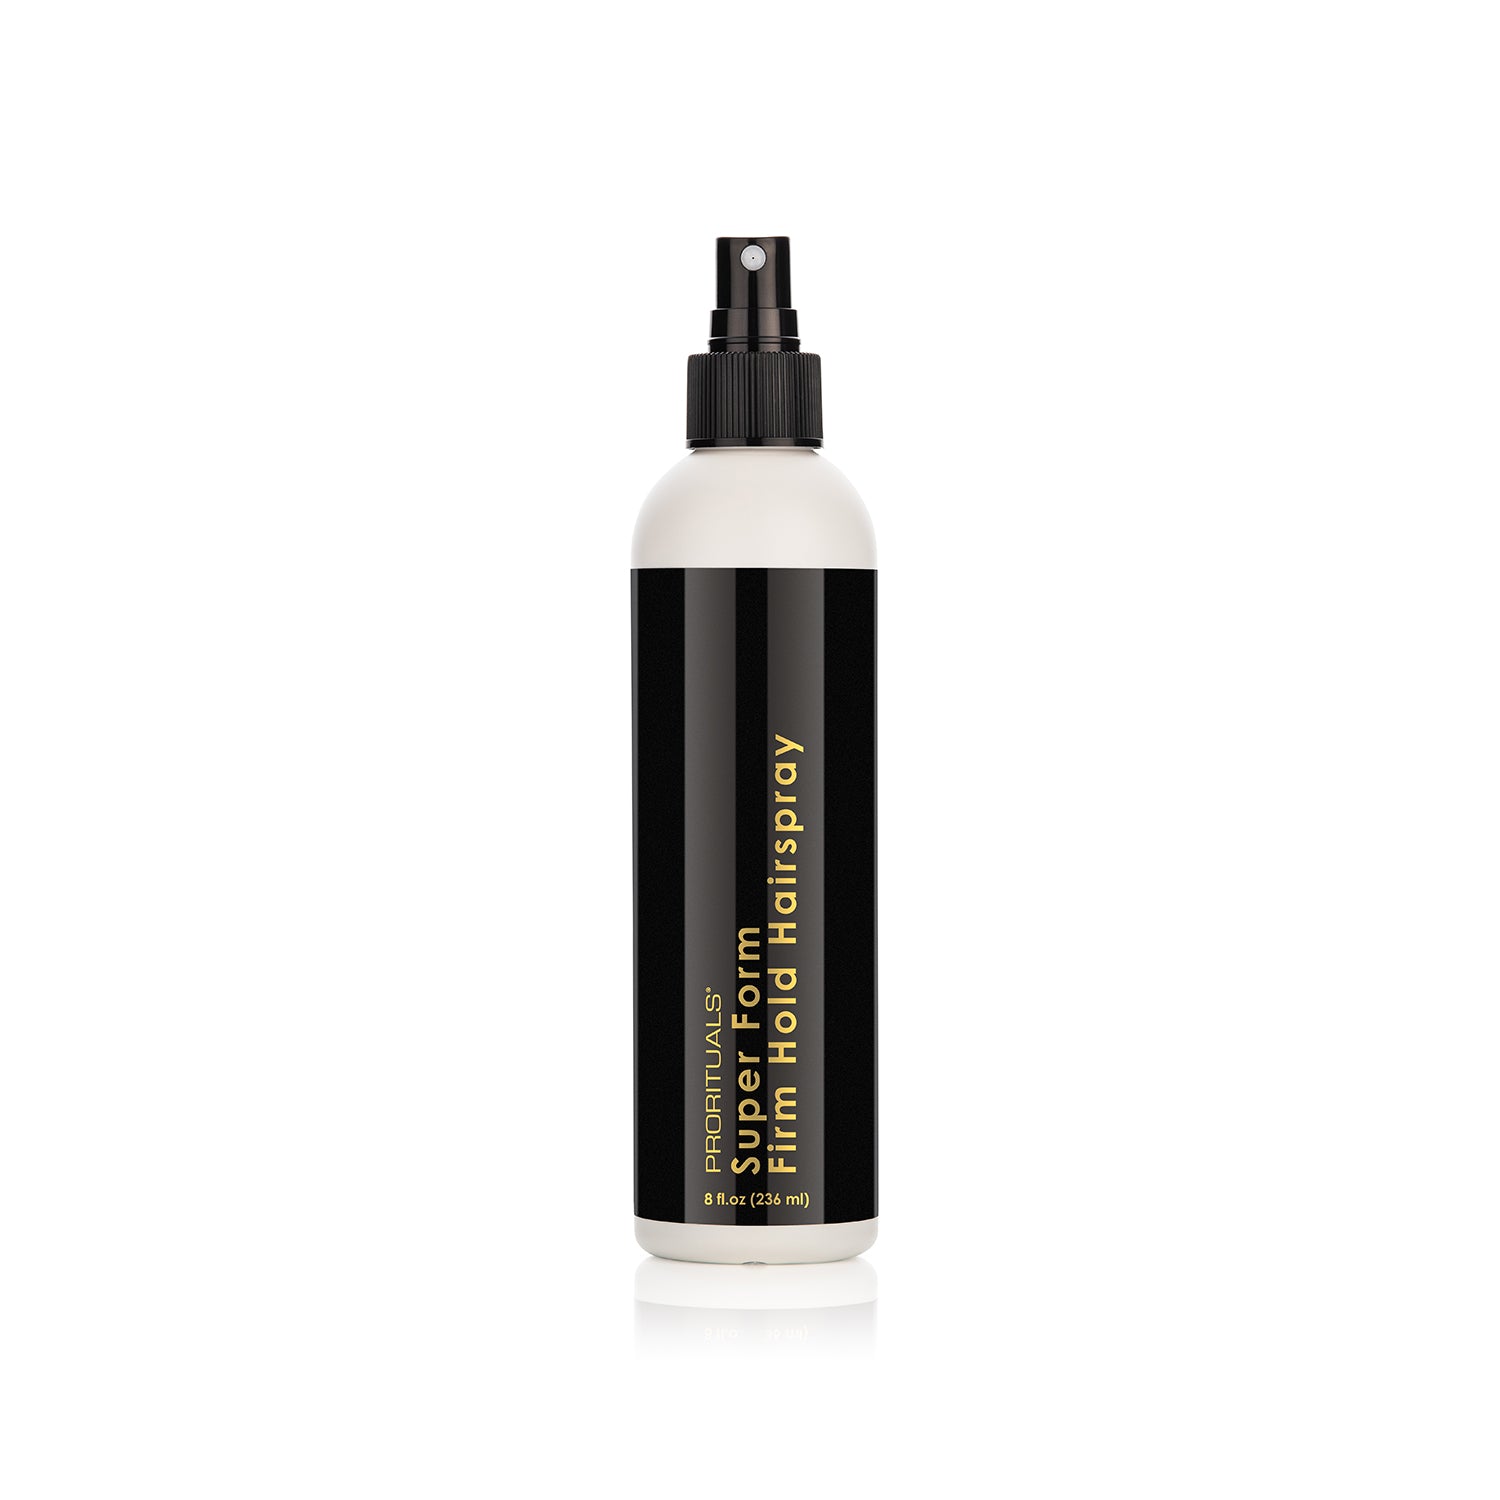 Super Form Firm Hold Hairspray